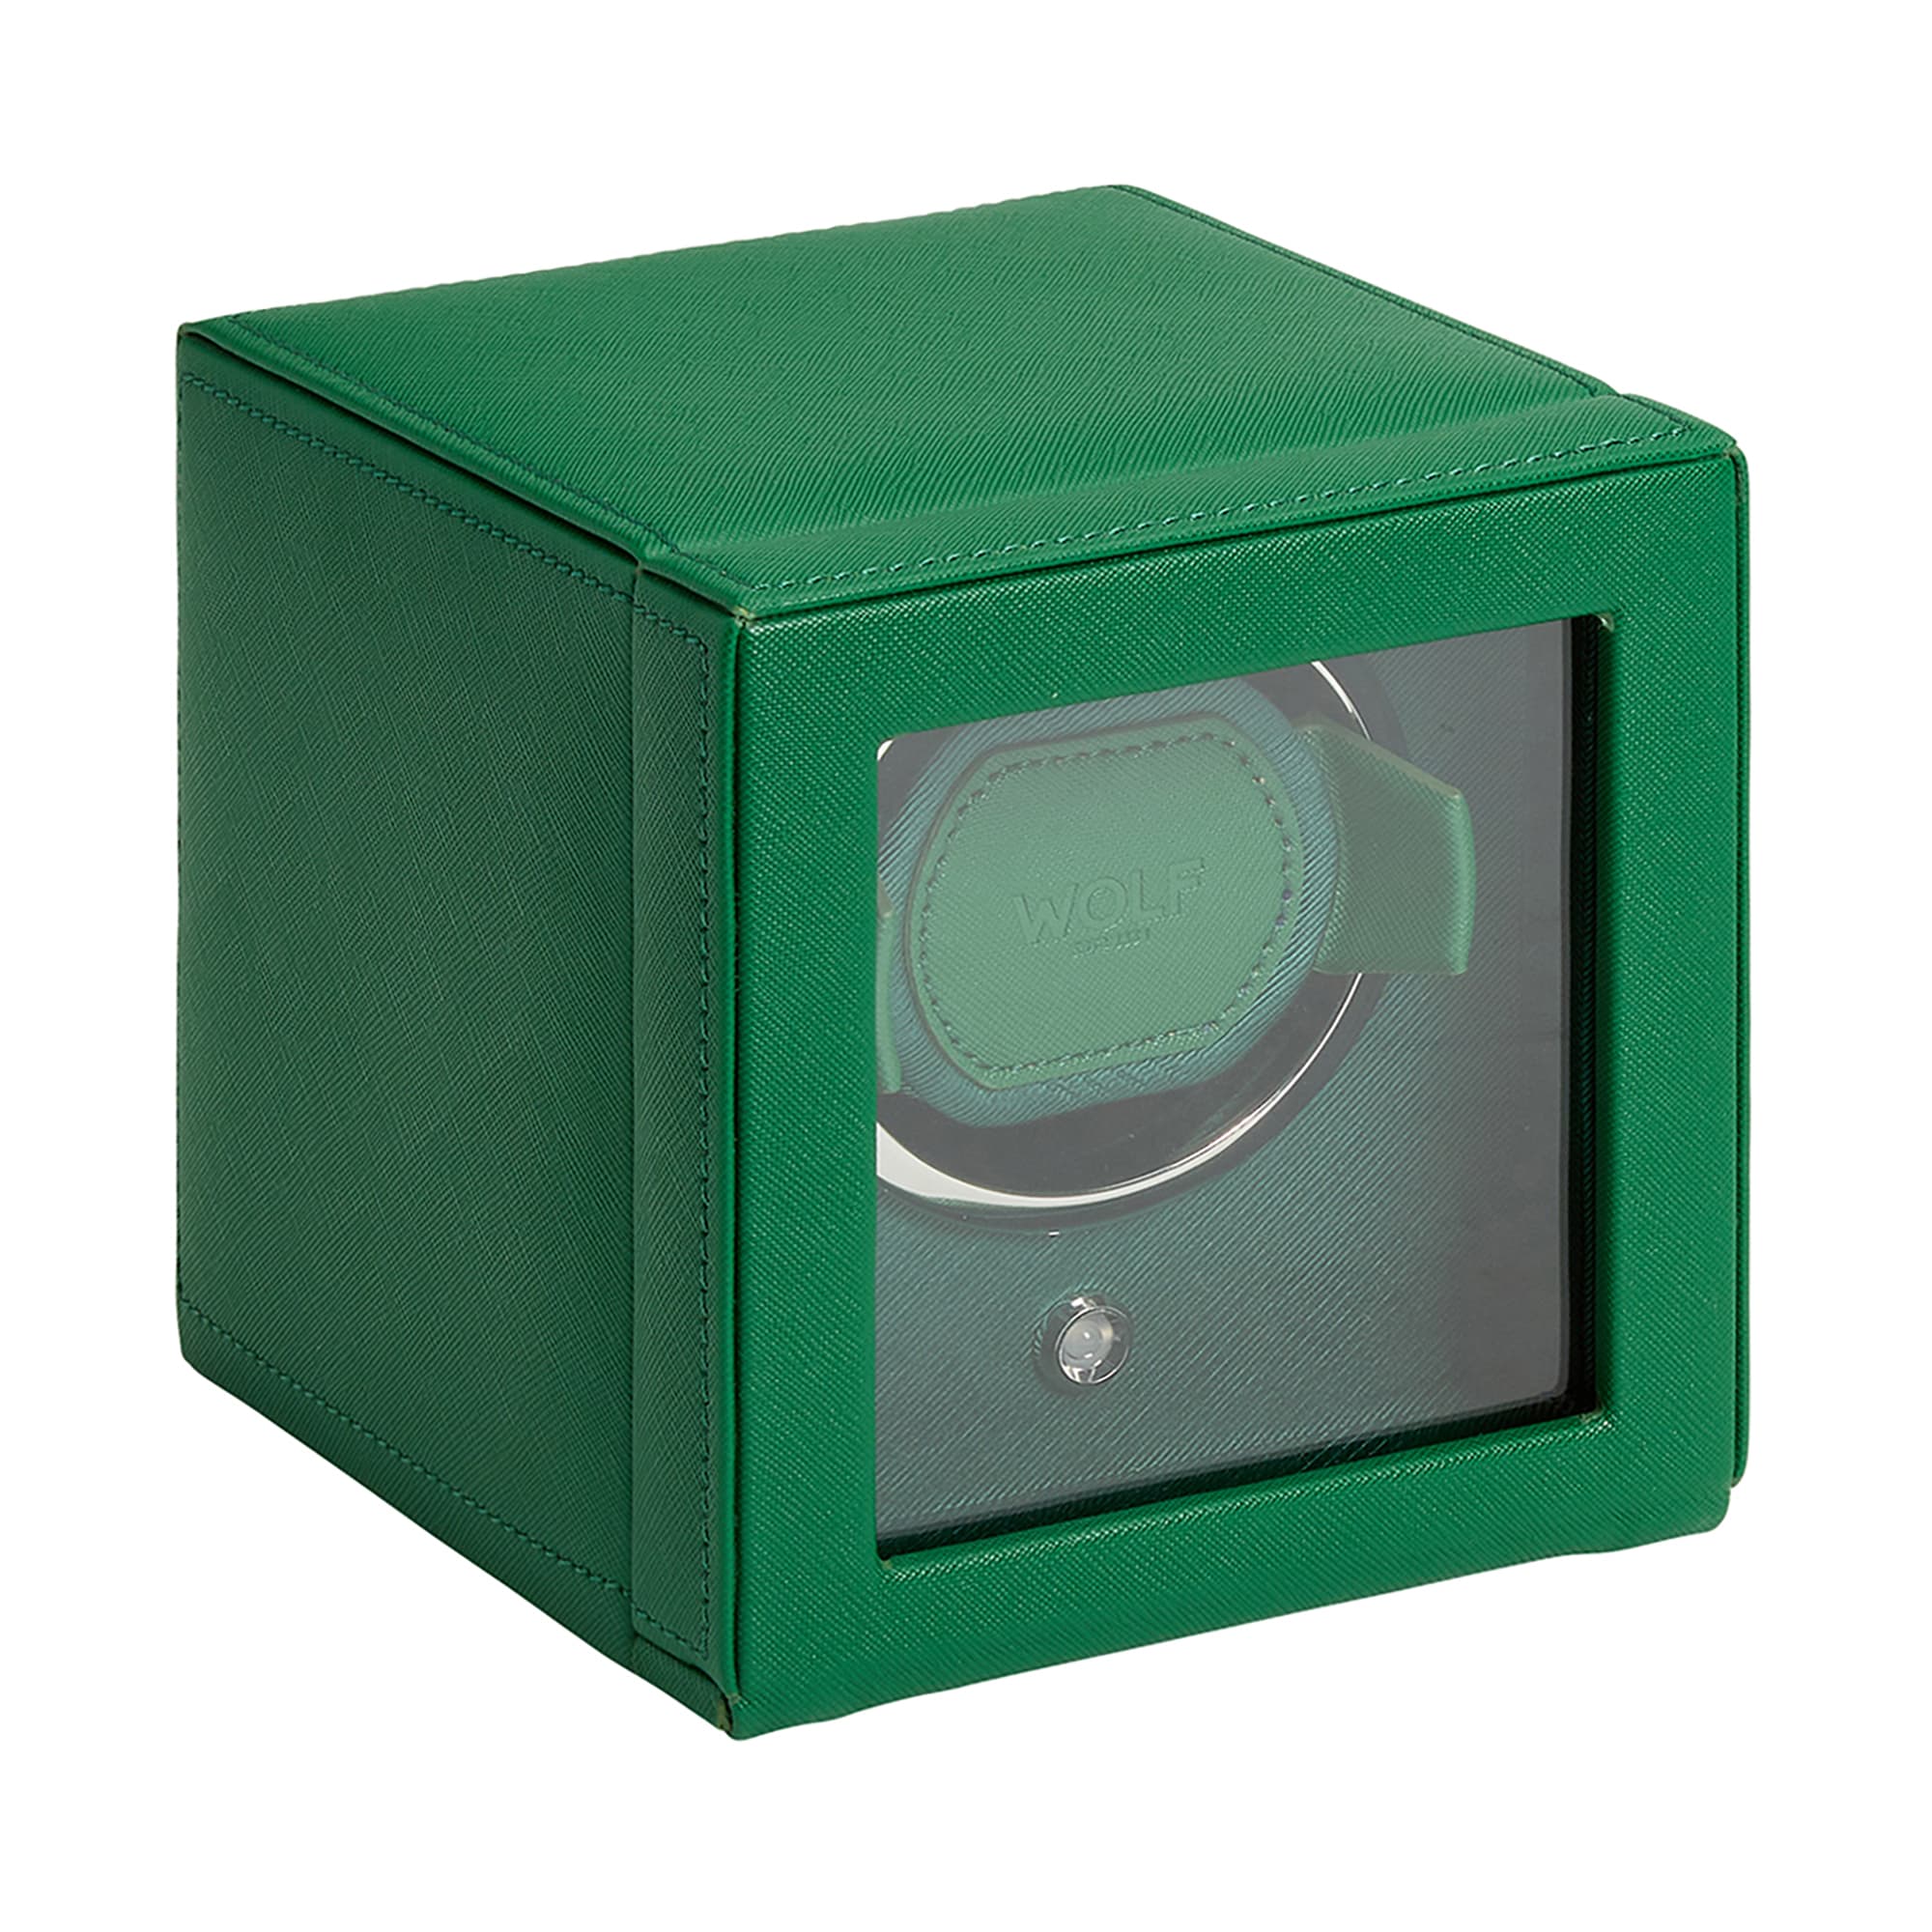 Wolf-Cub-Single-Watch-Winder-with-Cover-Green-461143-1